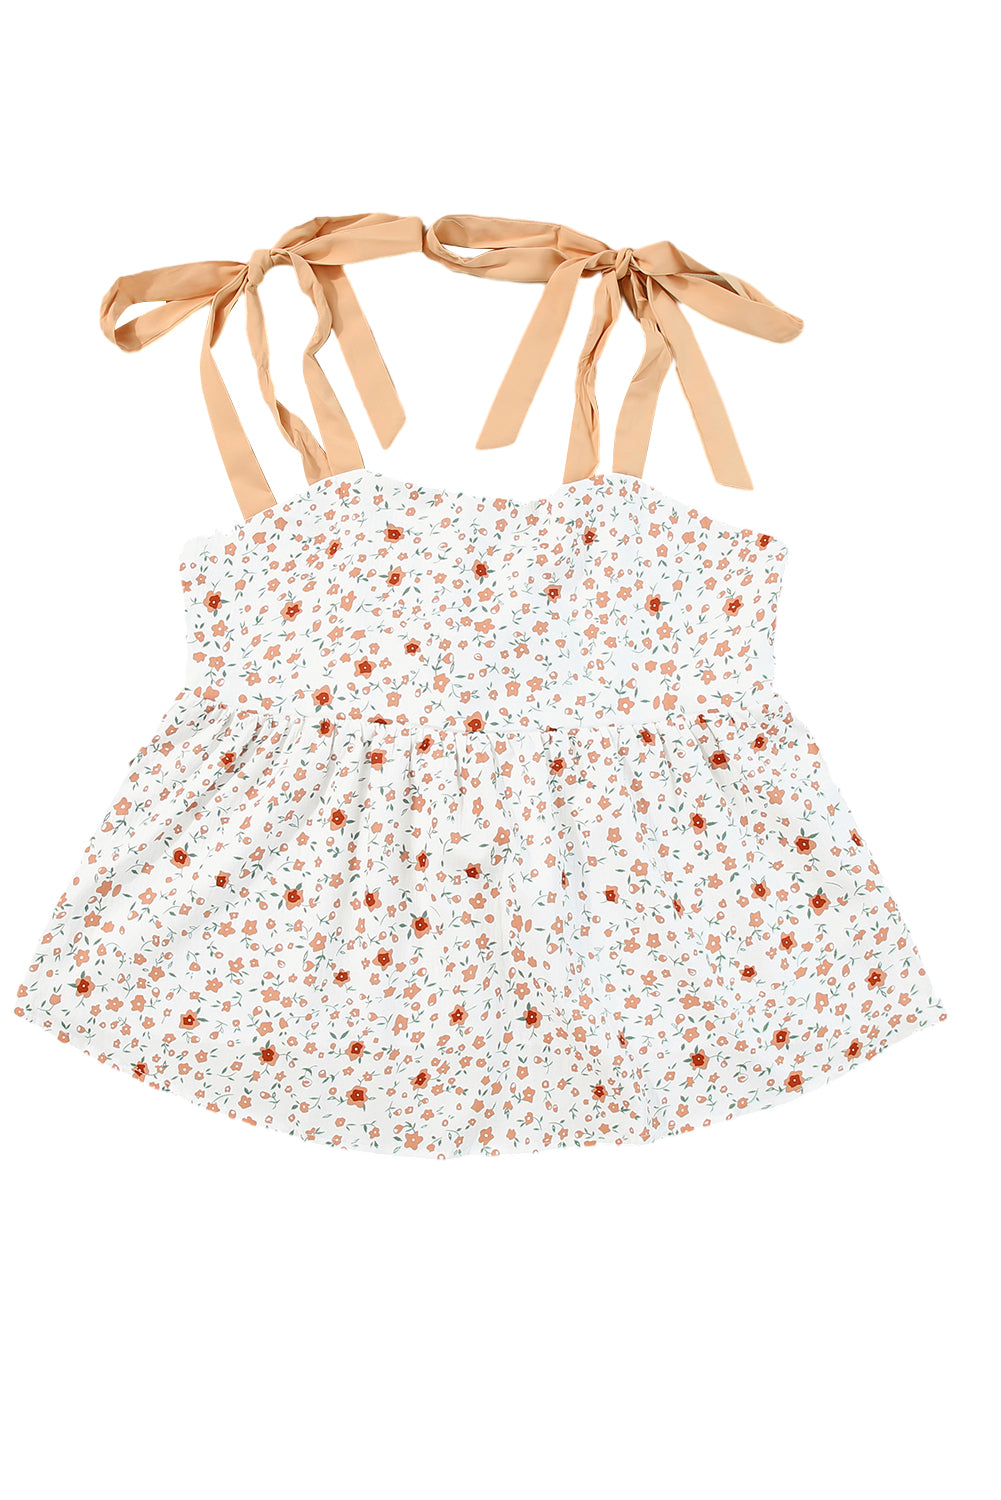 Canotta babydoll con stampa floreale bianca sulle spalle